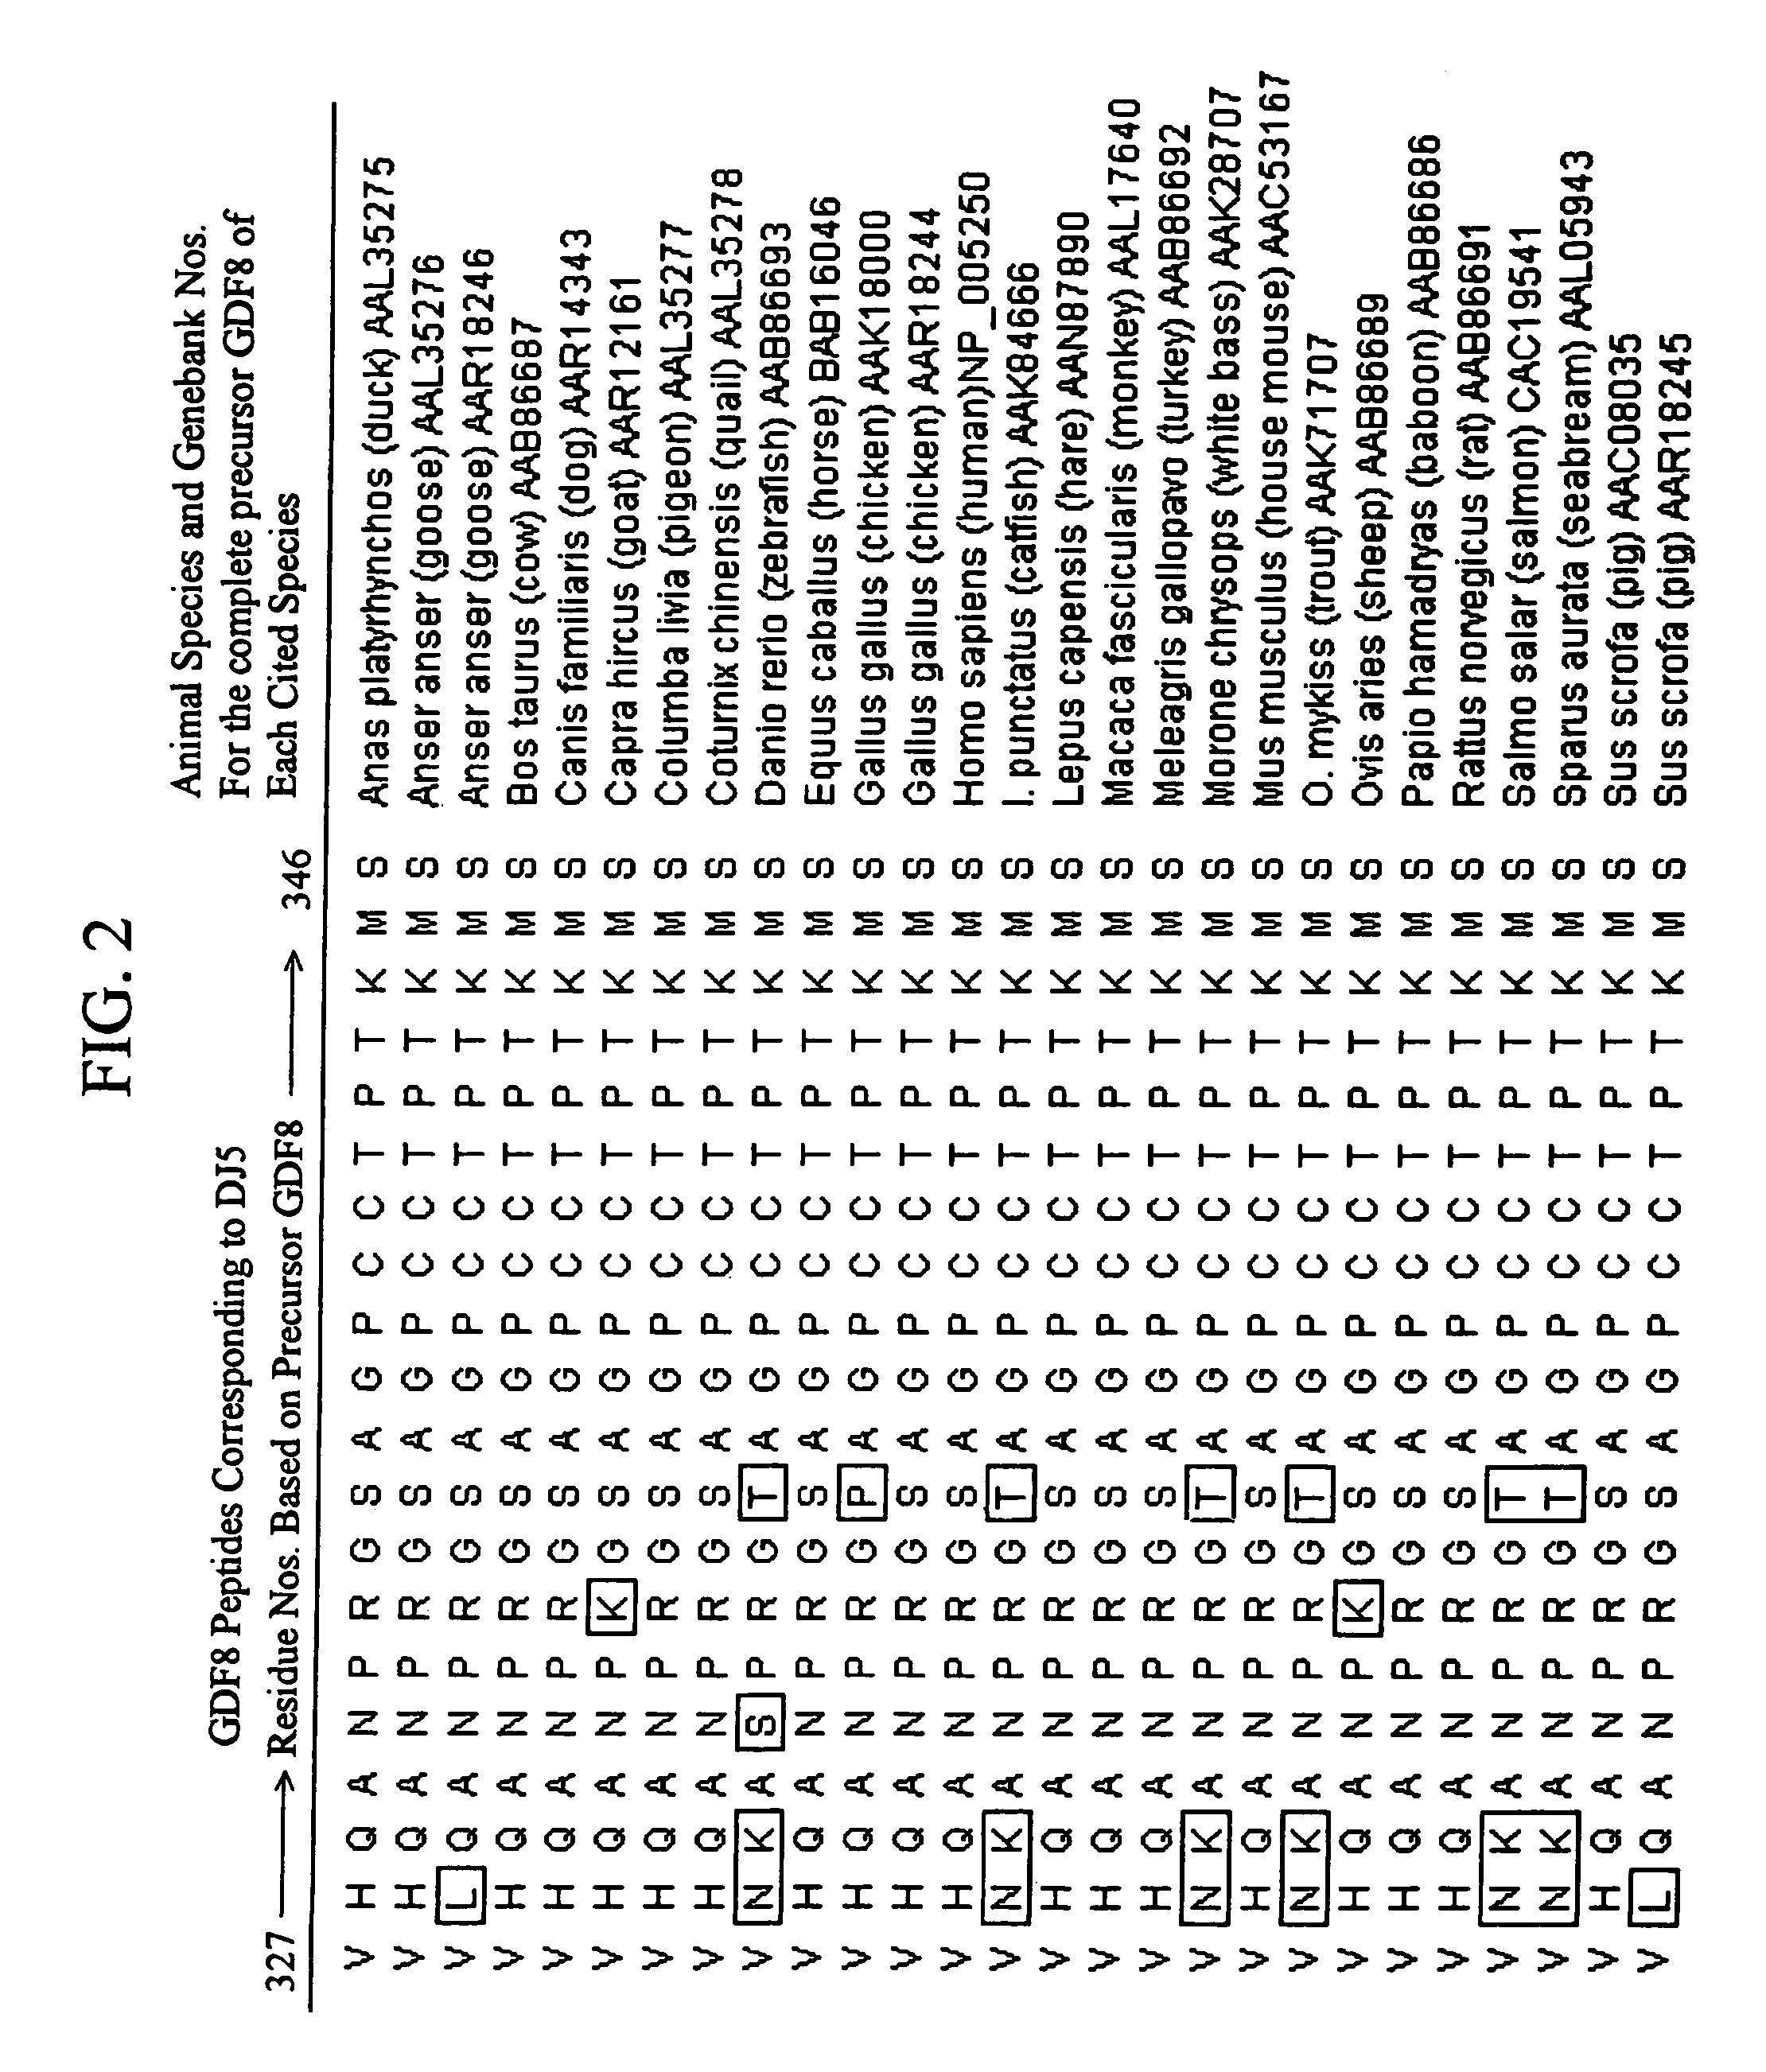 Plant virus coat fusion proteins with GDF8 epitopes and vaccines thereof